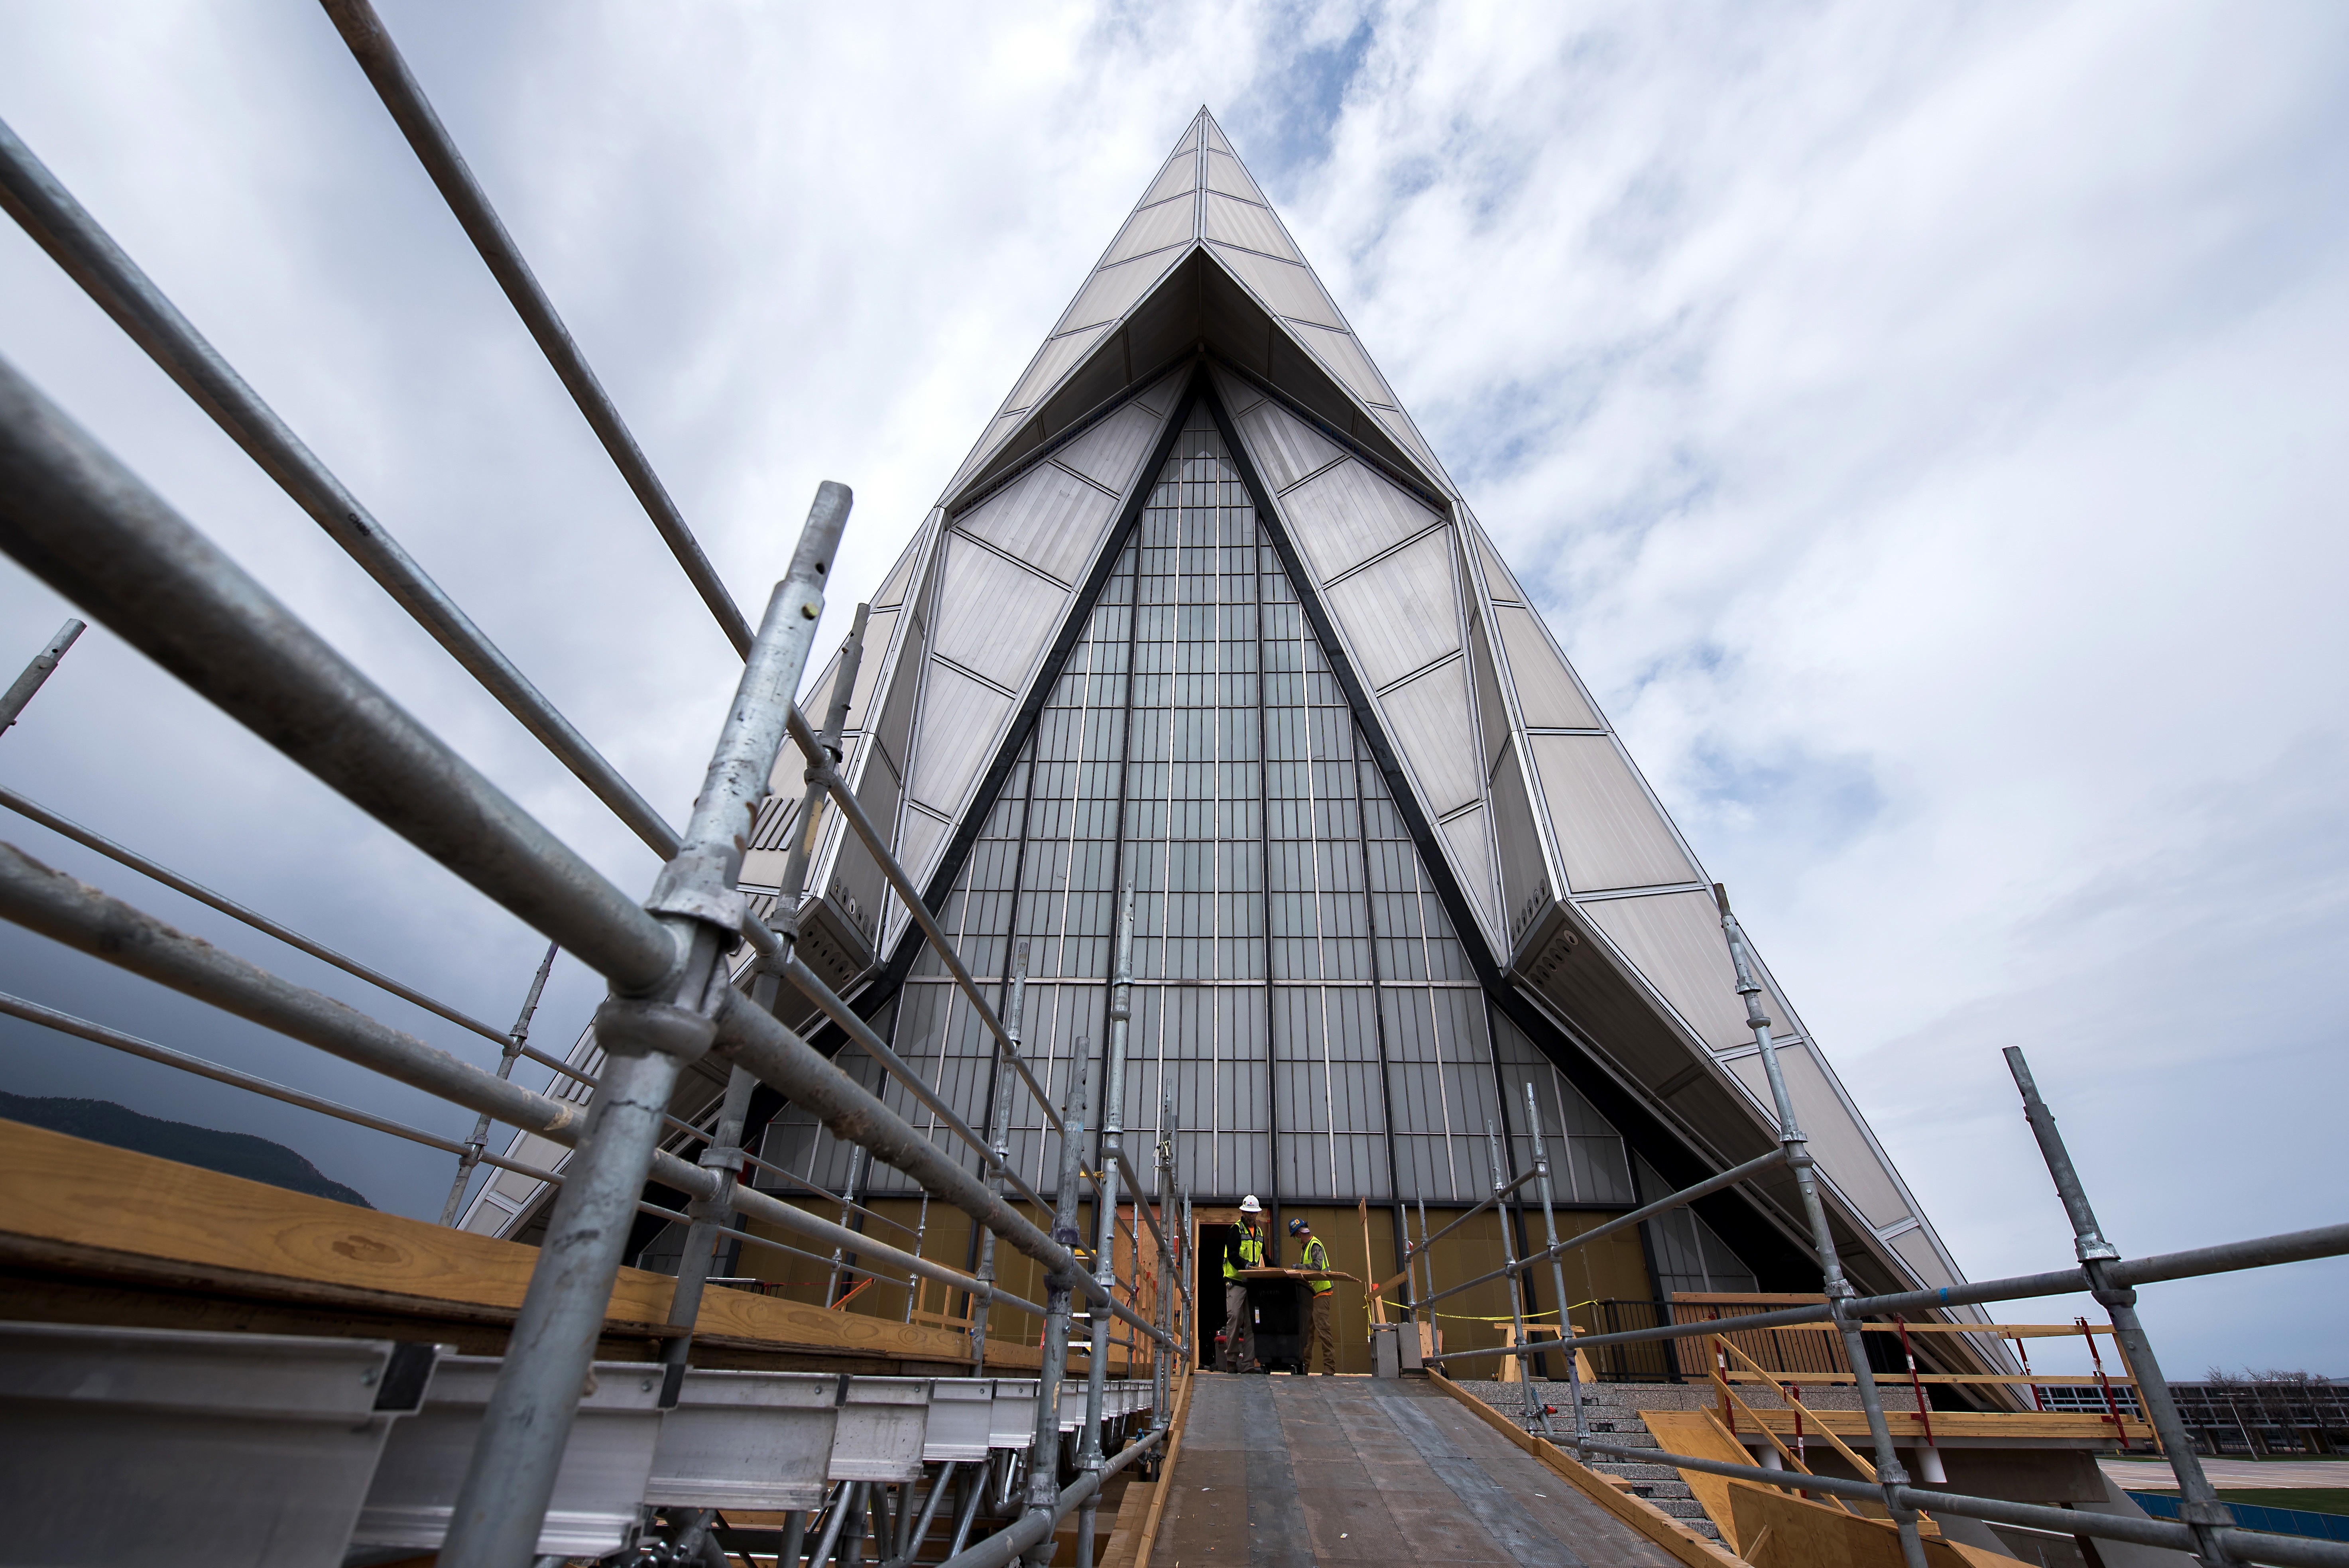 Progress To Renovate Restore Cadet Chapel Is Ongoing Today United States Air Force Academy News Display